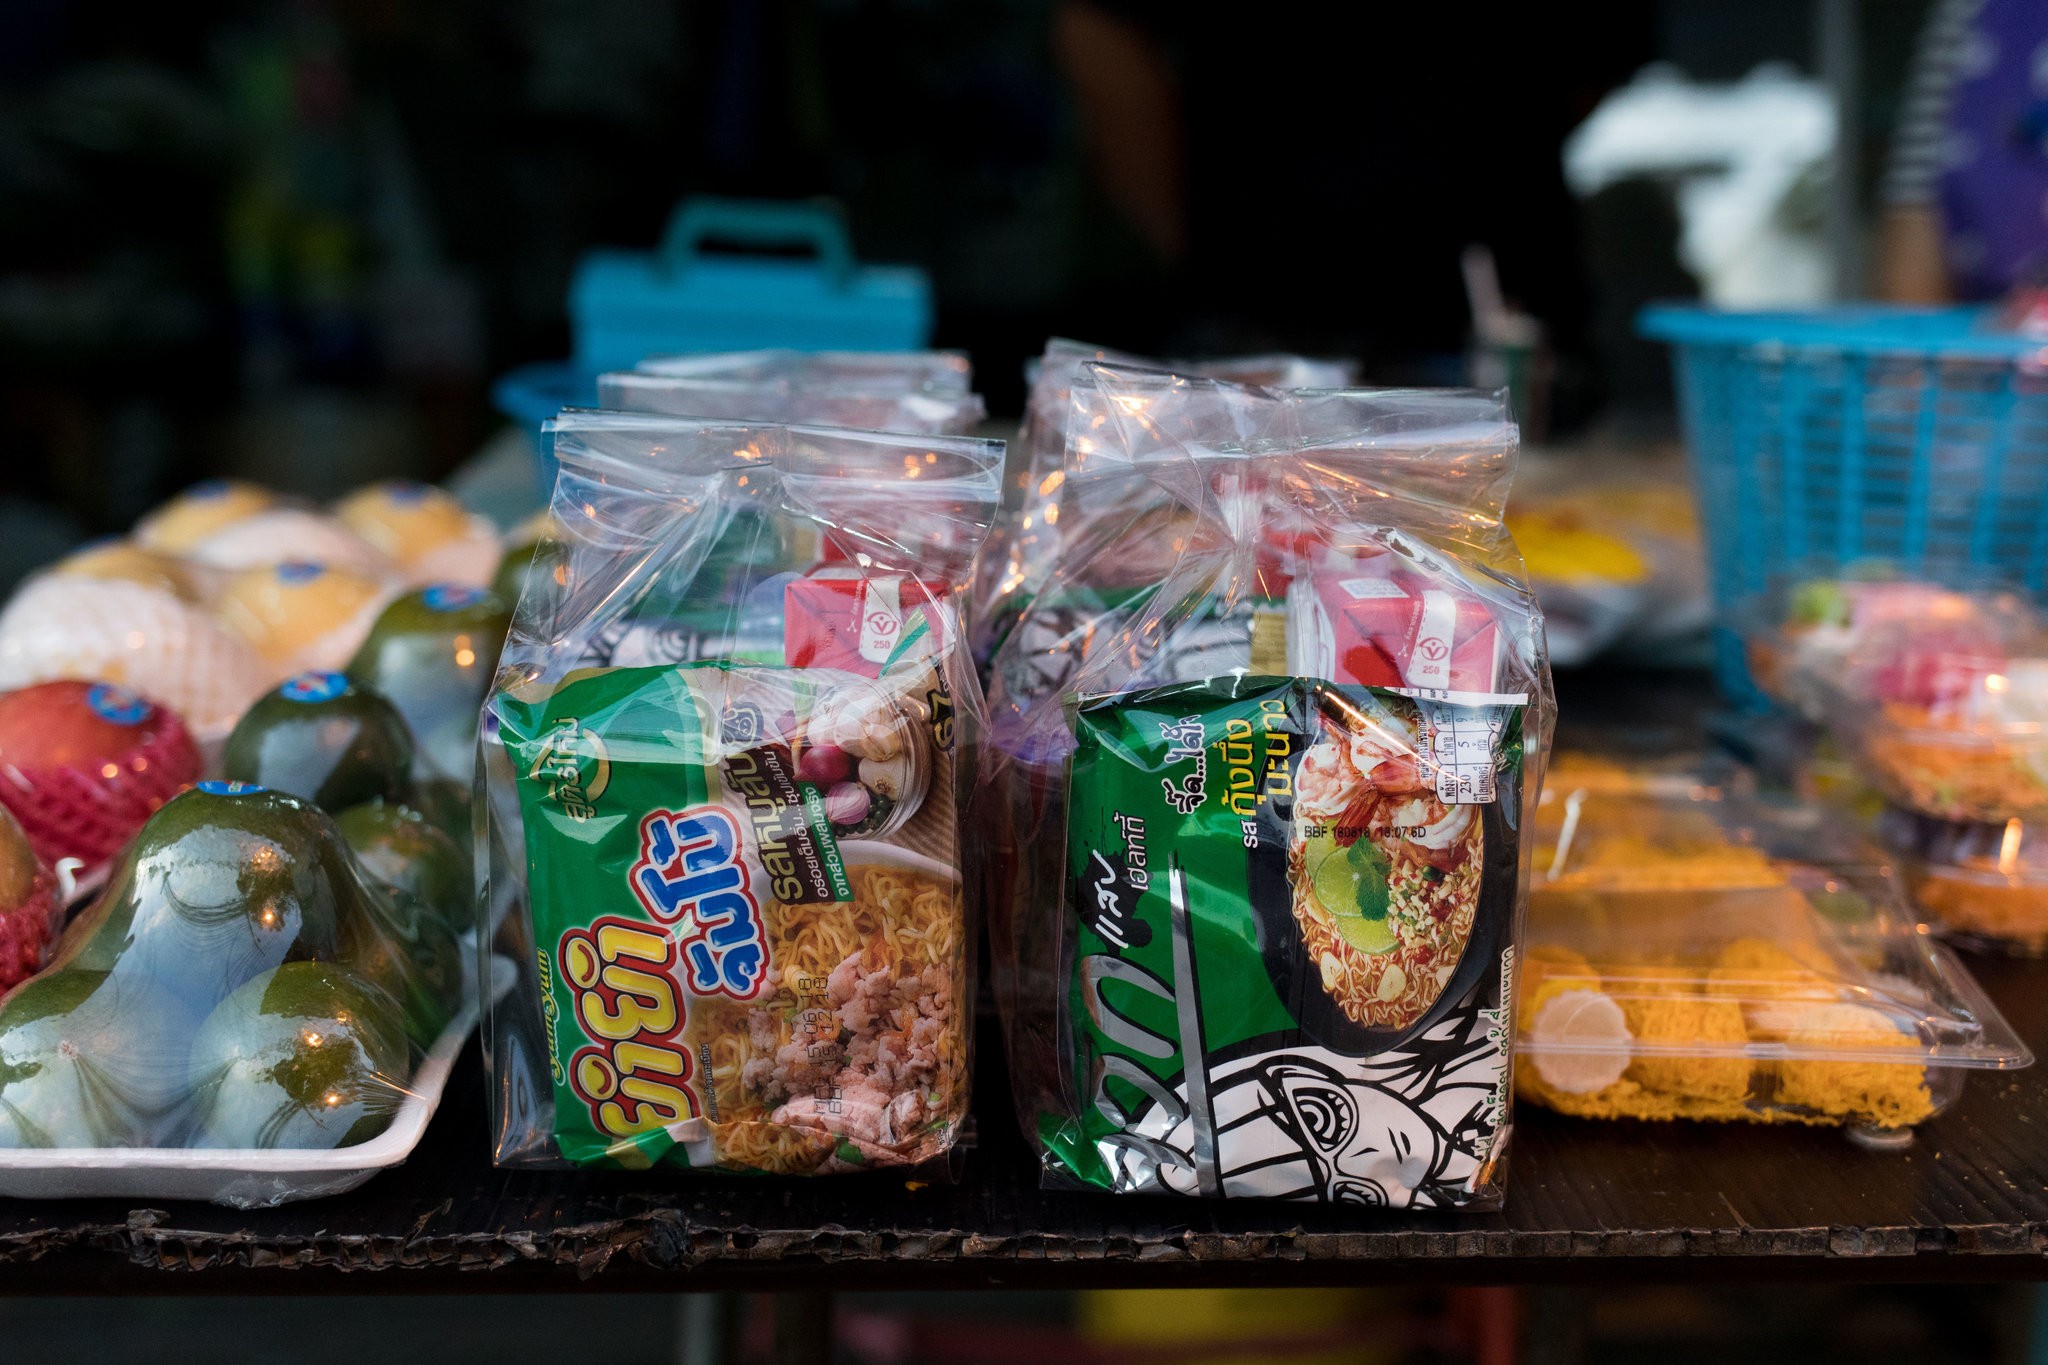 Prepackaged food, sold to be given to monks. “Soft drinks, boxed juice, sweet snacks, plus many of the foods are store-bought,” a nutrition professor says, describing some typical donations.CreditAmanda Mustard for The New York Times